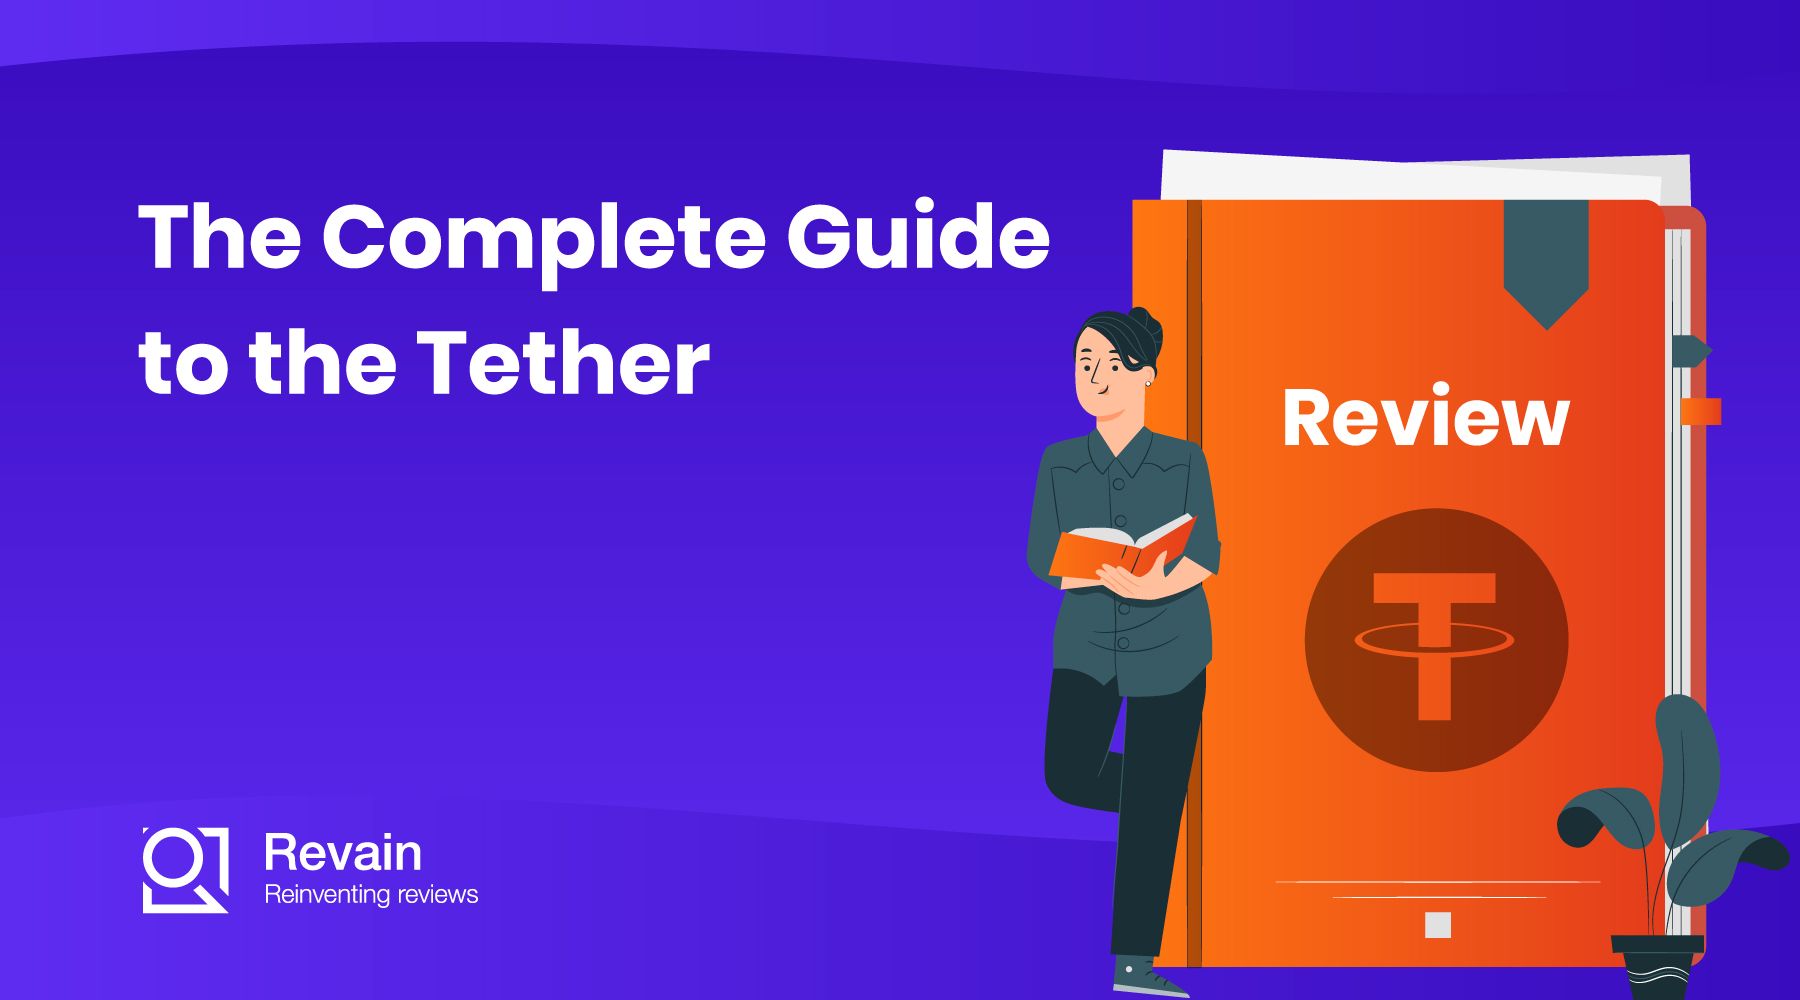 The Complete Guide to the Tether